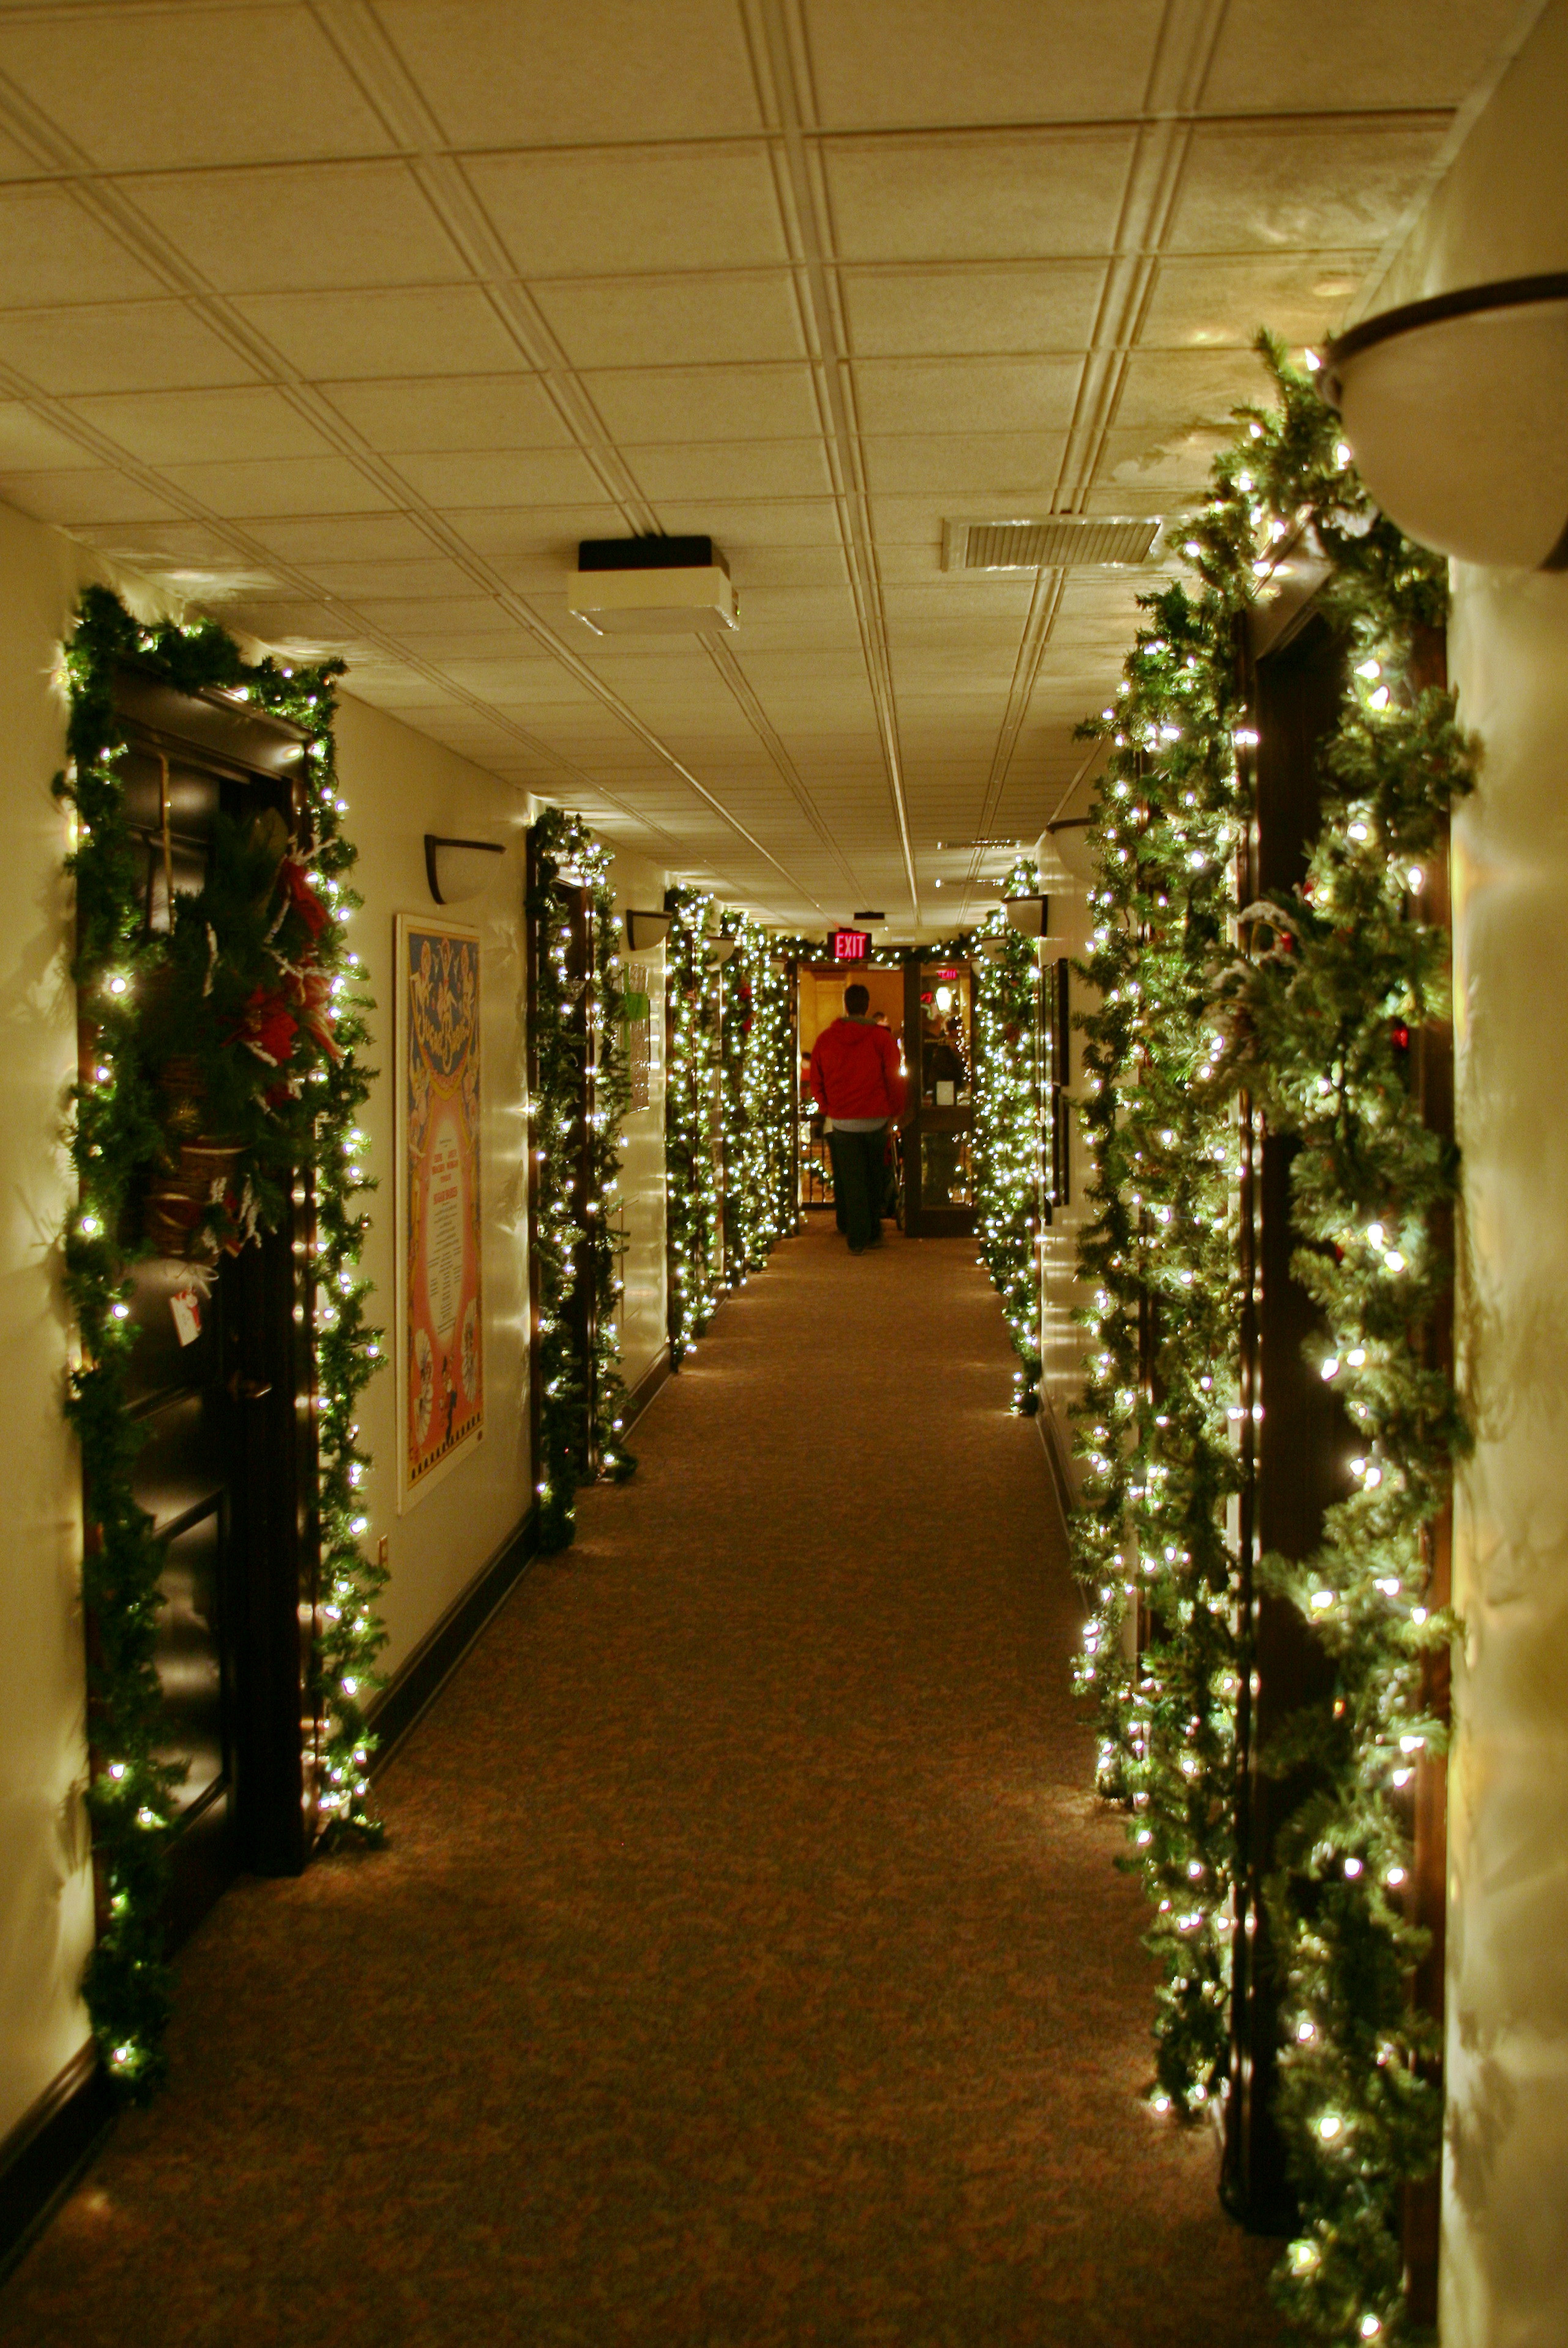 Christmas Floor Decorations
 File Indiana Hotel floor with Christmas decorations